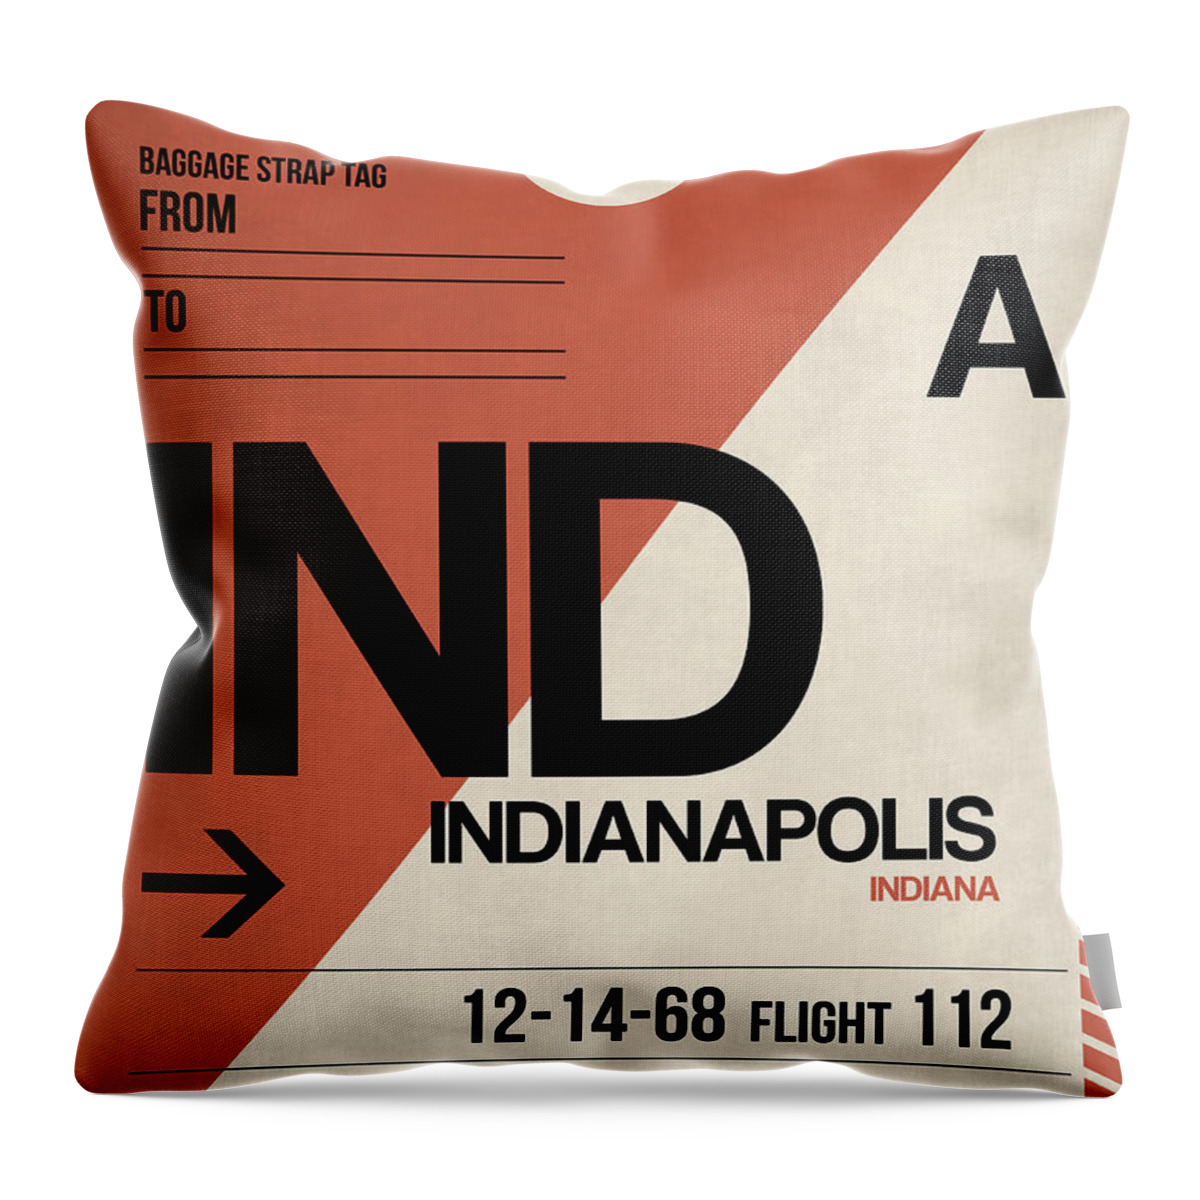 Indianapolis Throw Pillow featuring the digital art Indianapolis Airport Poster 1 by Naxart Studio